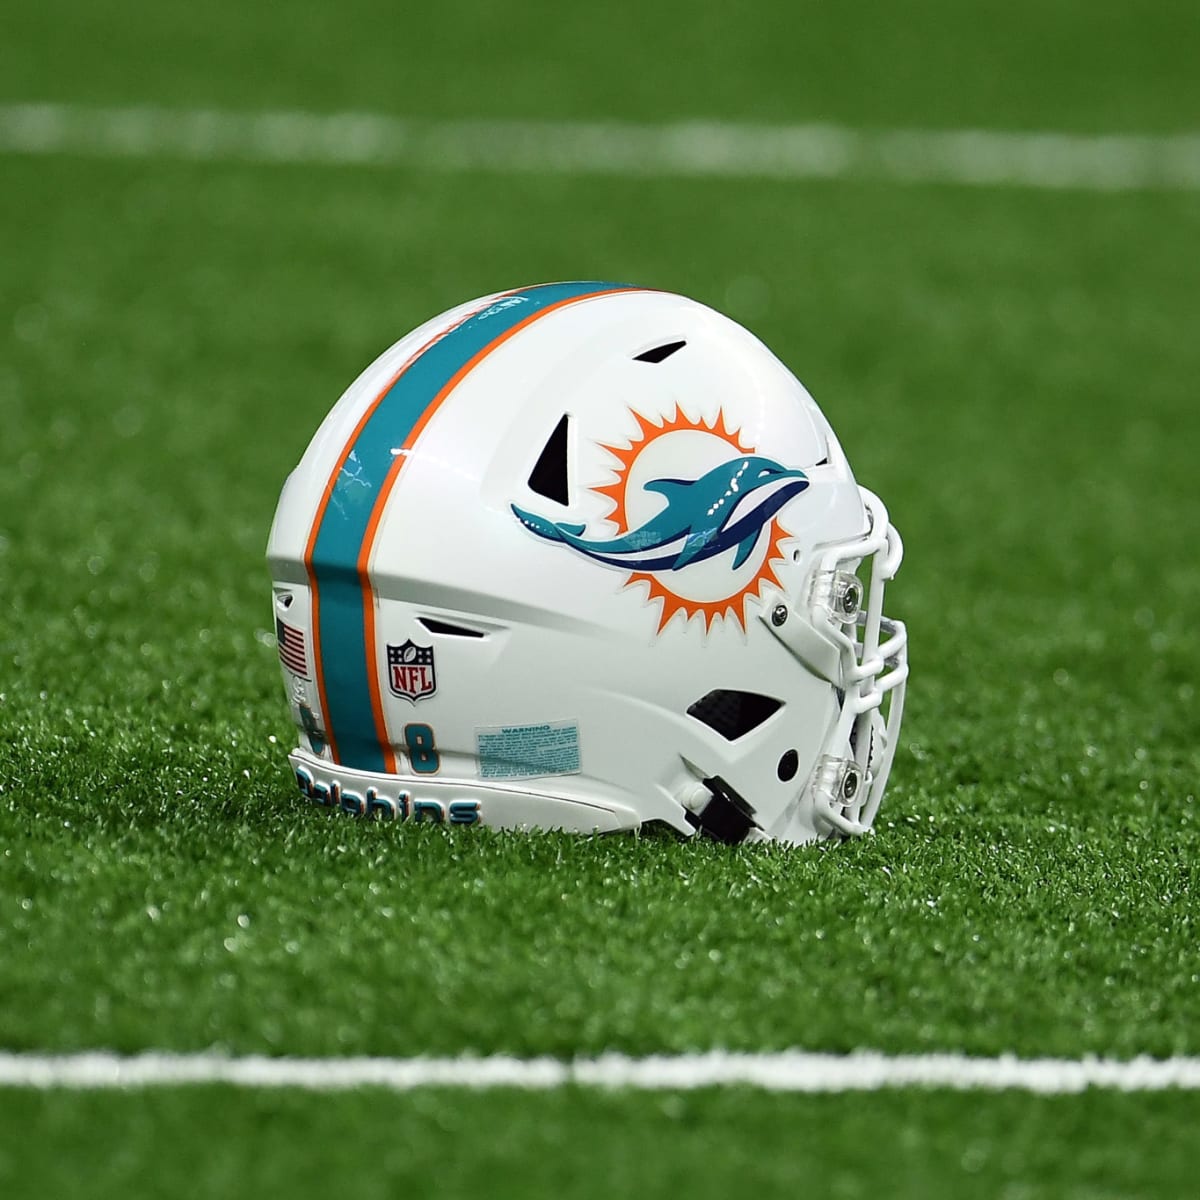 Dolphins Announce Starting Quarterback For Playoff Game vs. Bills